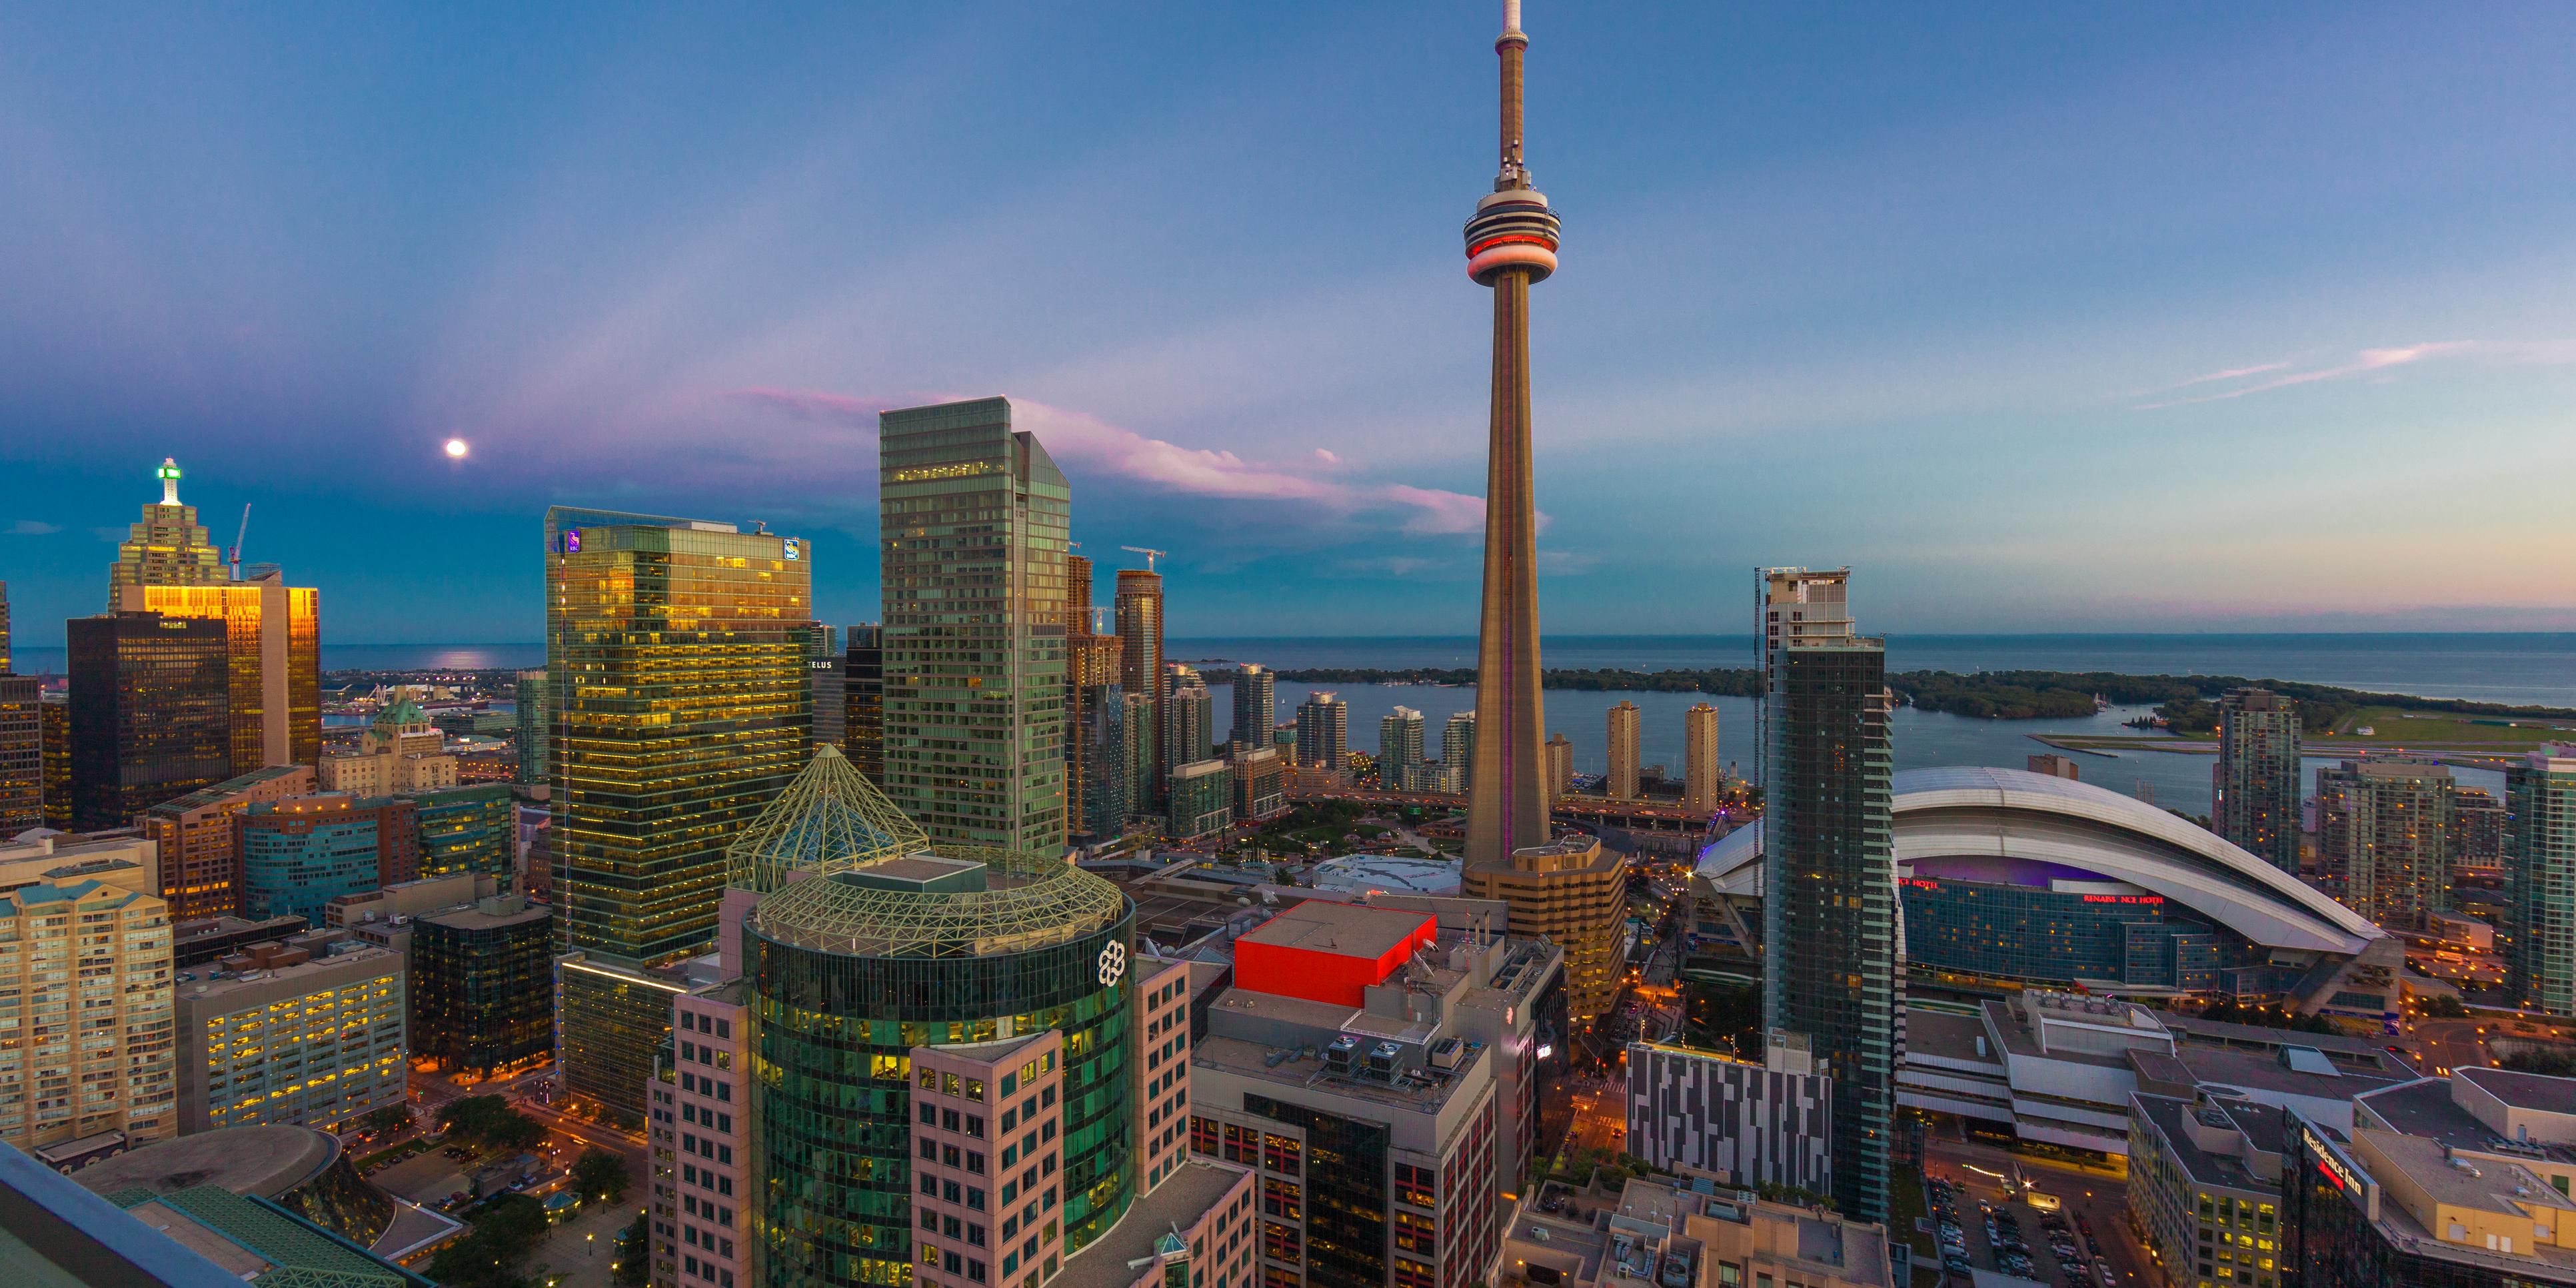 Toronto’s expansive downtown is made up of a mosaic of more than two dozen distinct neighbourhoods. World-class shopping, dining, theatre and pro sports, not to mention relaxing green spaces and Lake Ontario are all waiting to be discovered, making downtown an urban explorer’s dream.